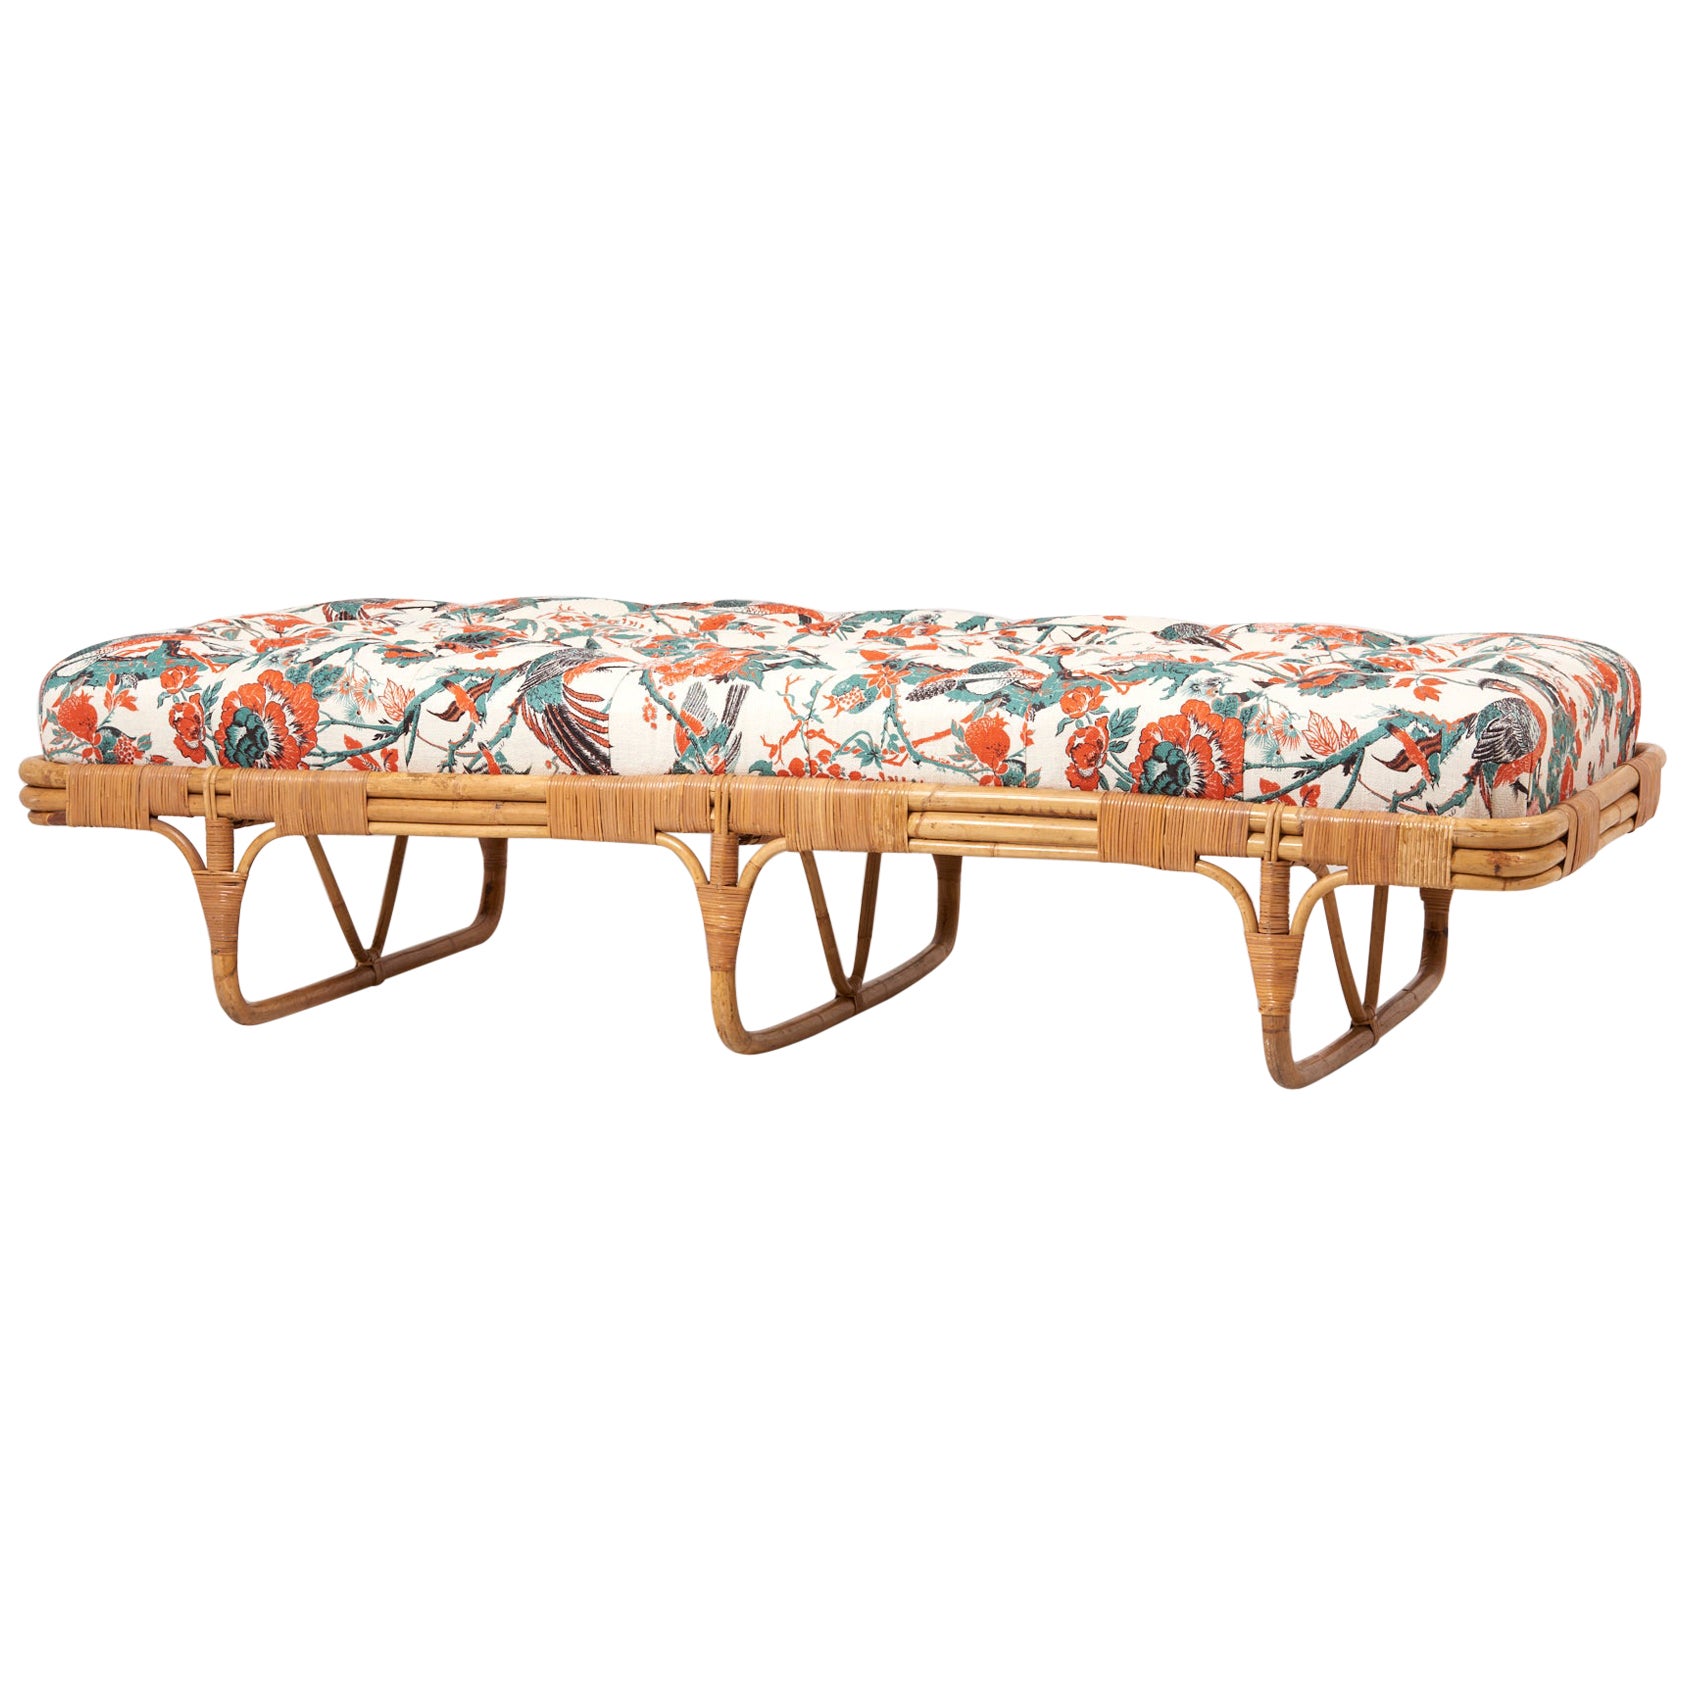 1950s Basket Daybed in a Josef Frank Style Fabric